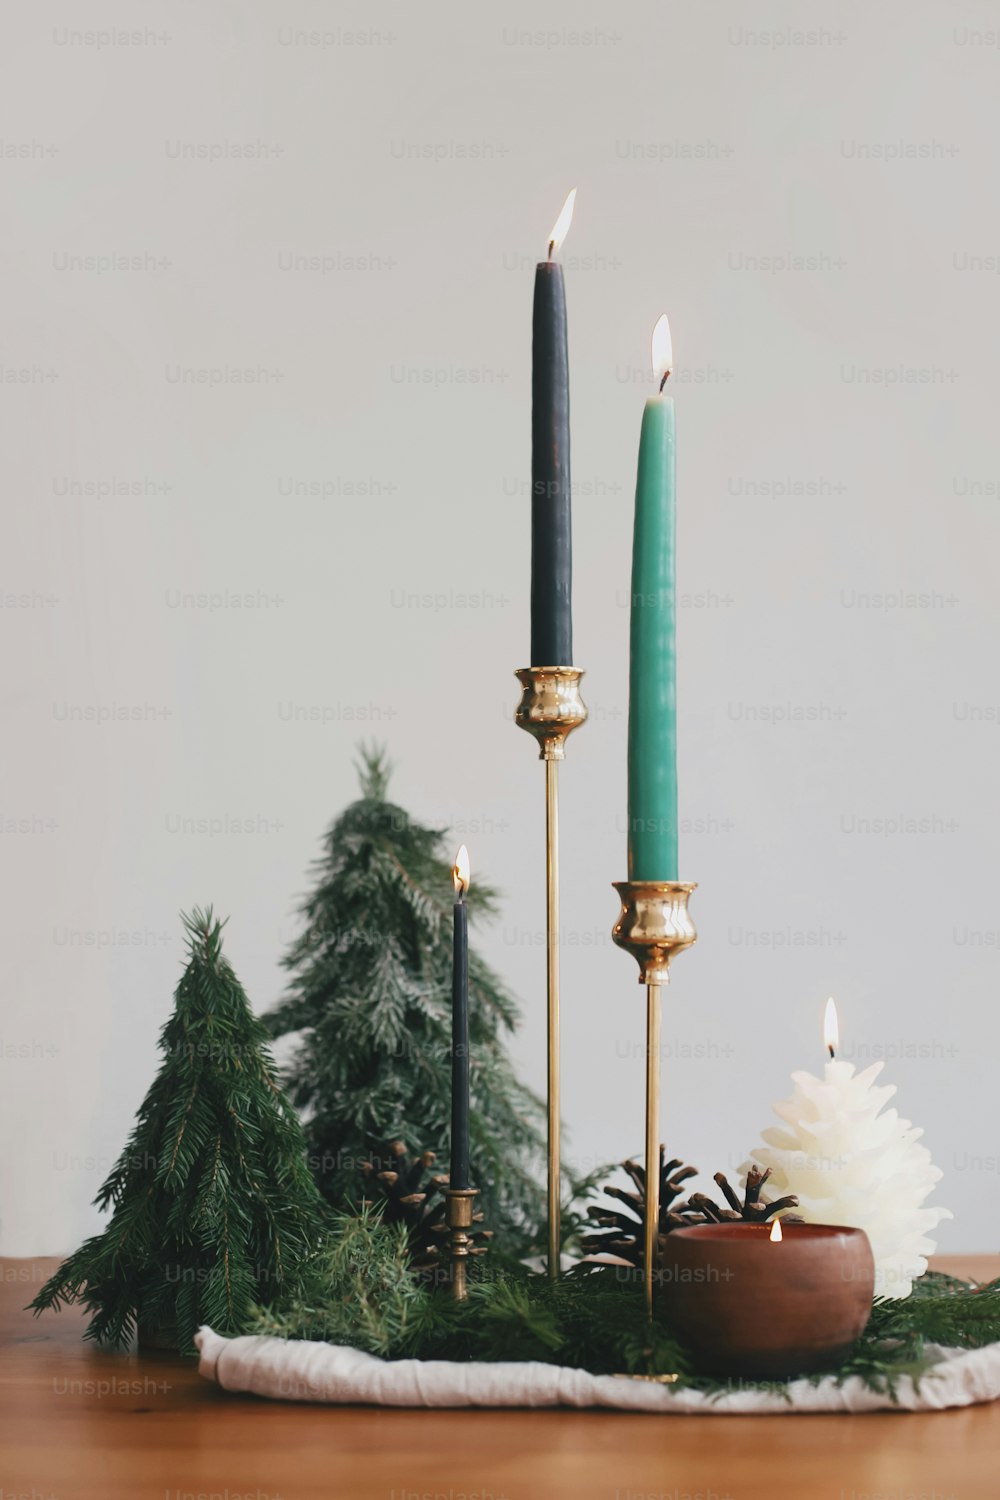 Modern Christmas table setting, stylish miniature christmas trees, candles and pine cone decorations. Festive zero waste decor and handmade little fir trees. Happy Holidays